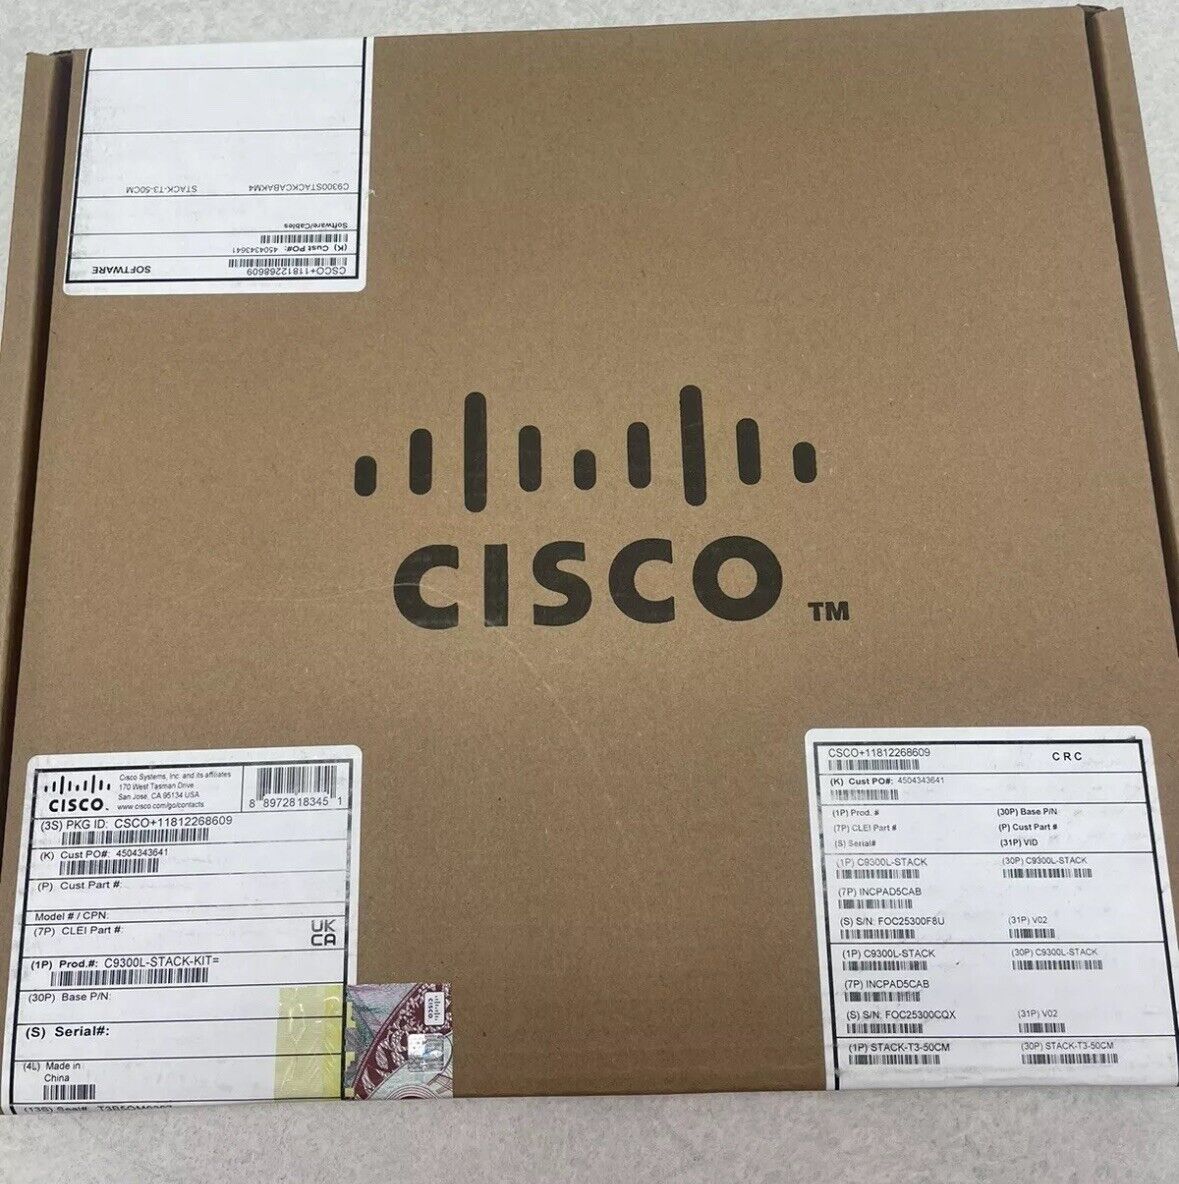 NEW C9300L-STACK-KIT Cisco Catalyst 9300L Stacking Kit for C9300 Series Switches